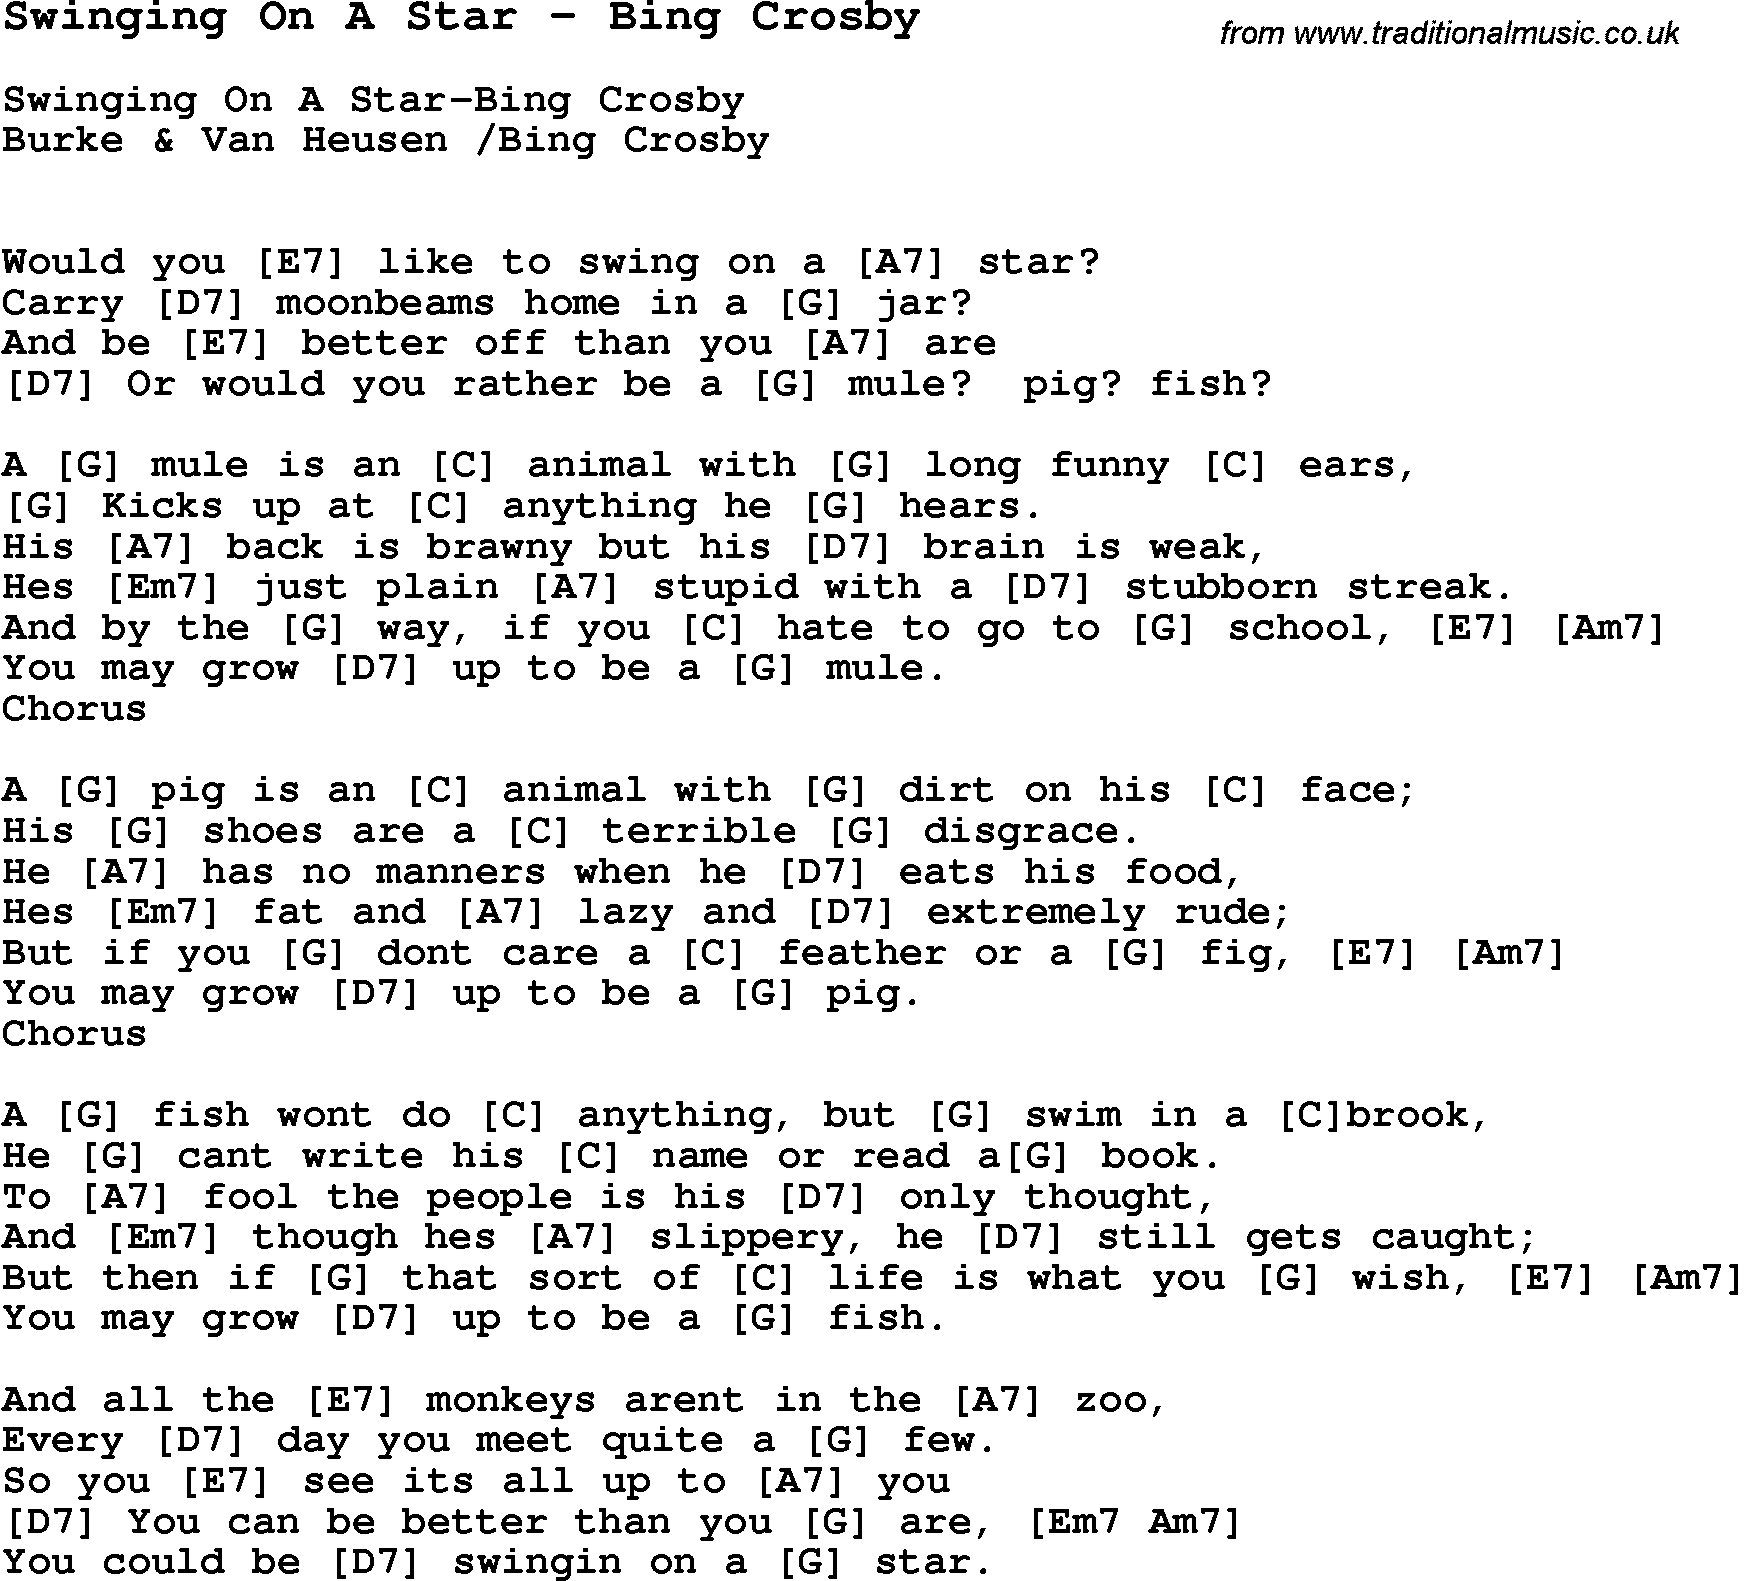 Song Swinging On A Star by Bing Crosby, with lyrics for vocal performance and accompaniment chords for Ukulele, Guitar Banjo etc.